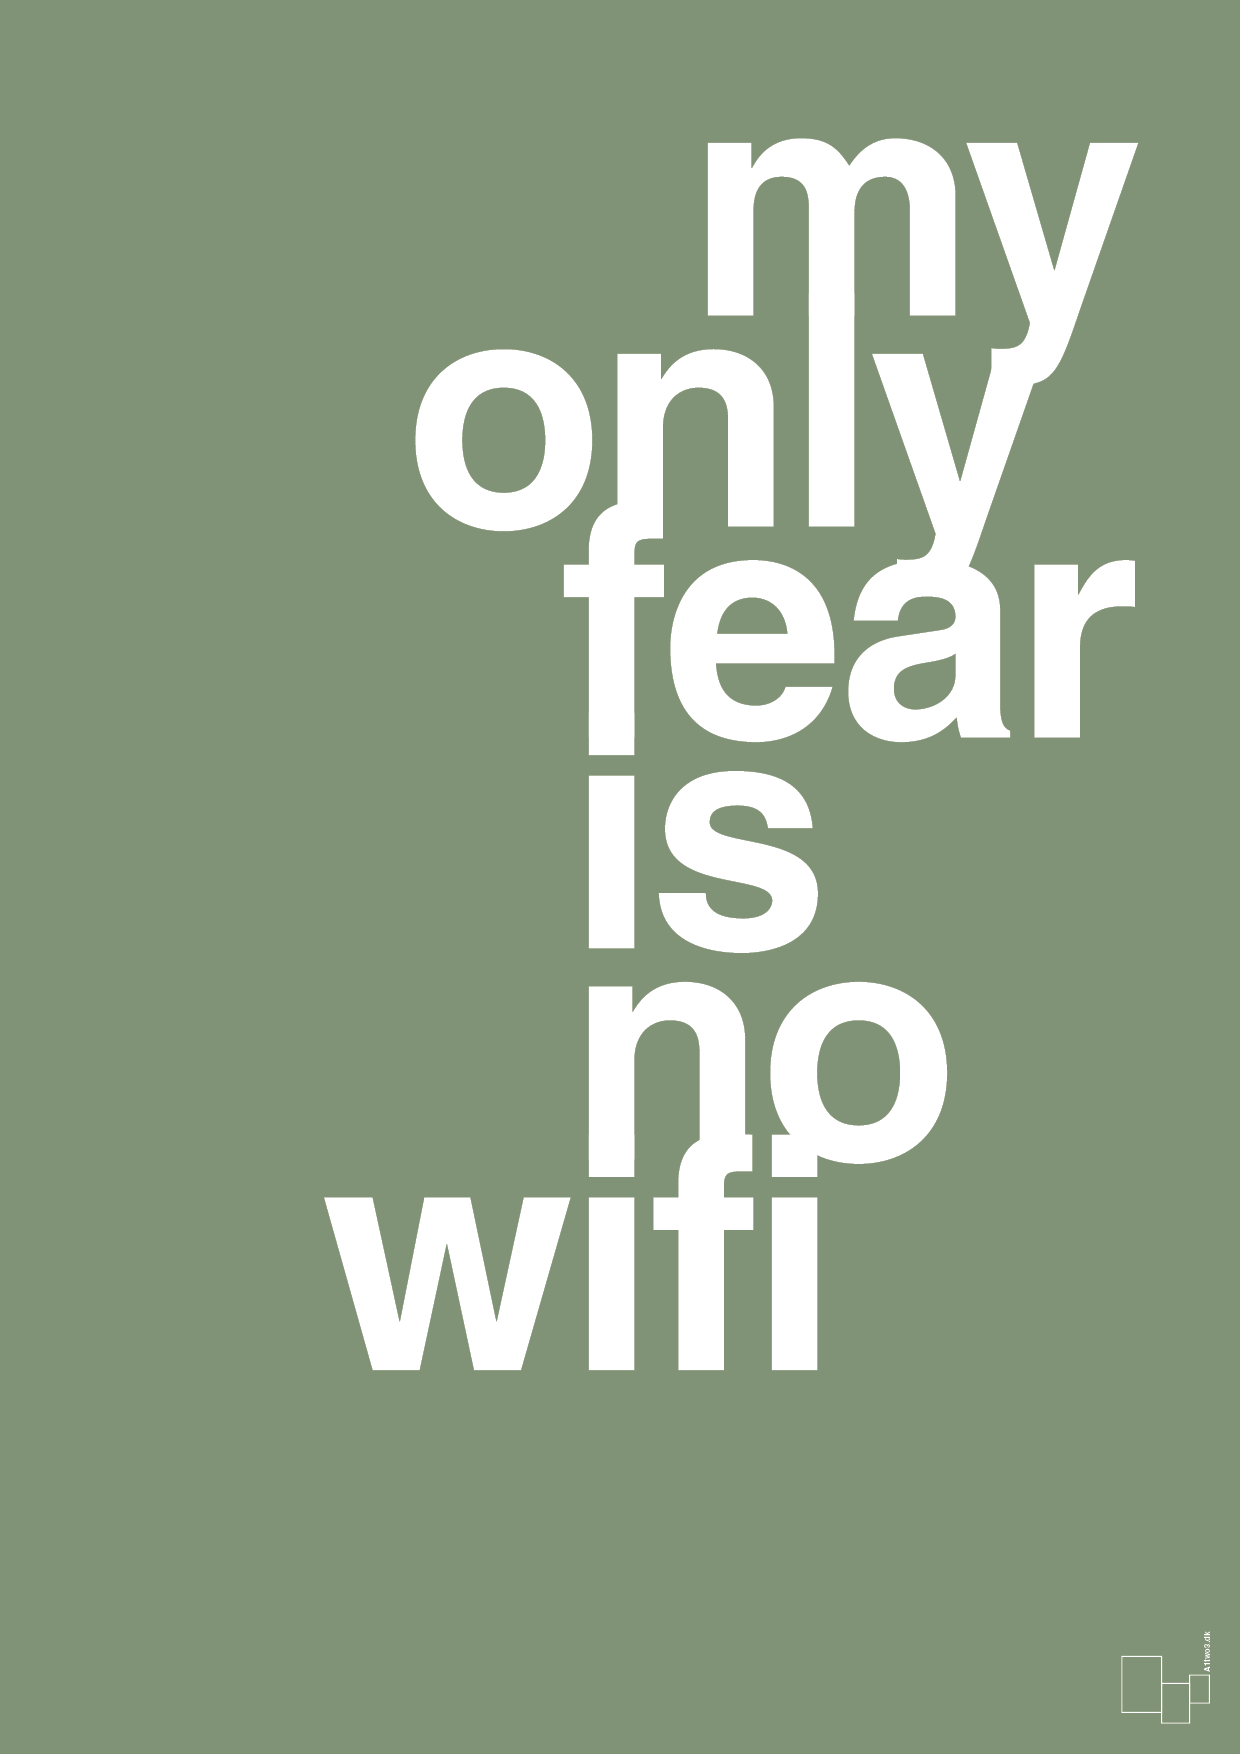 my only fear is no wifi - Plakat med Sport & Fritid i Jade